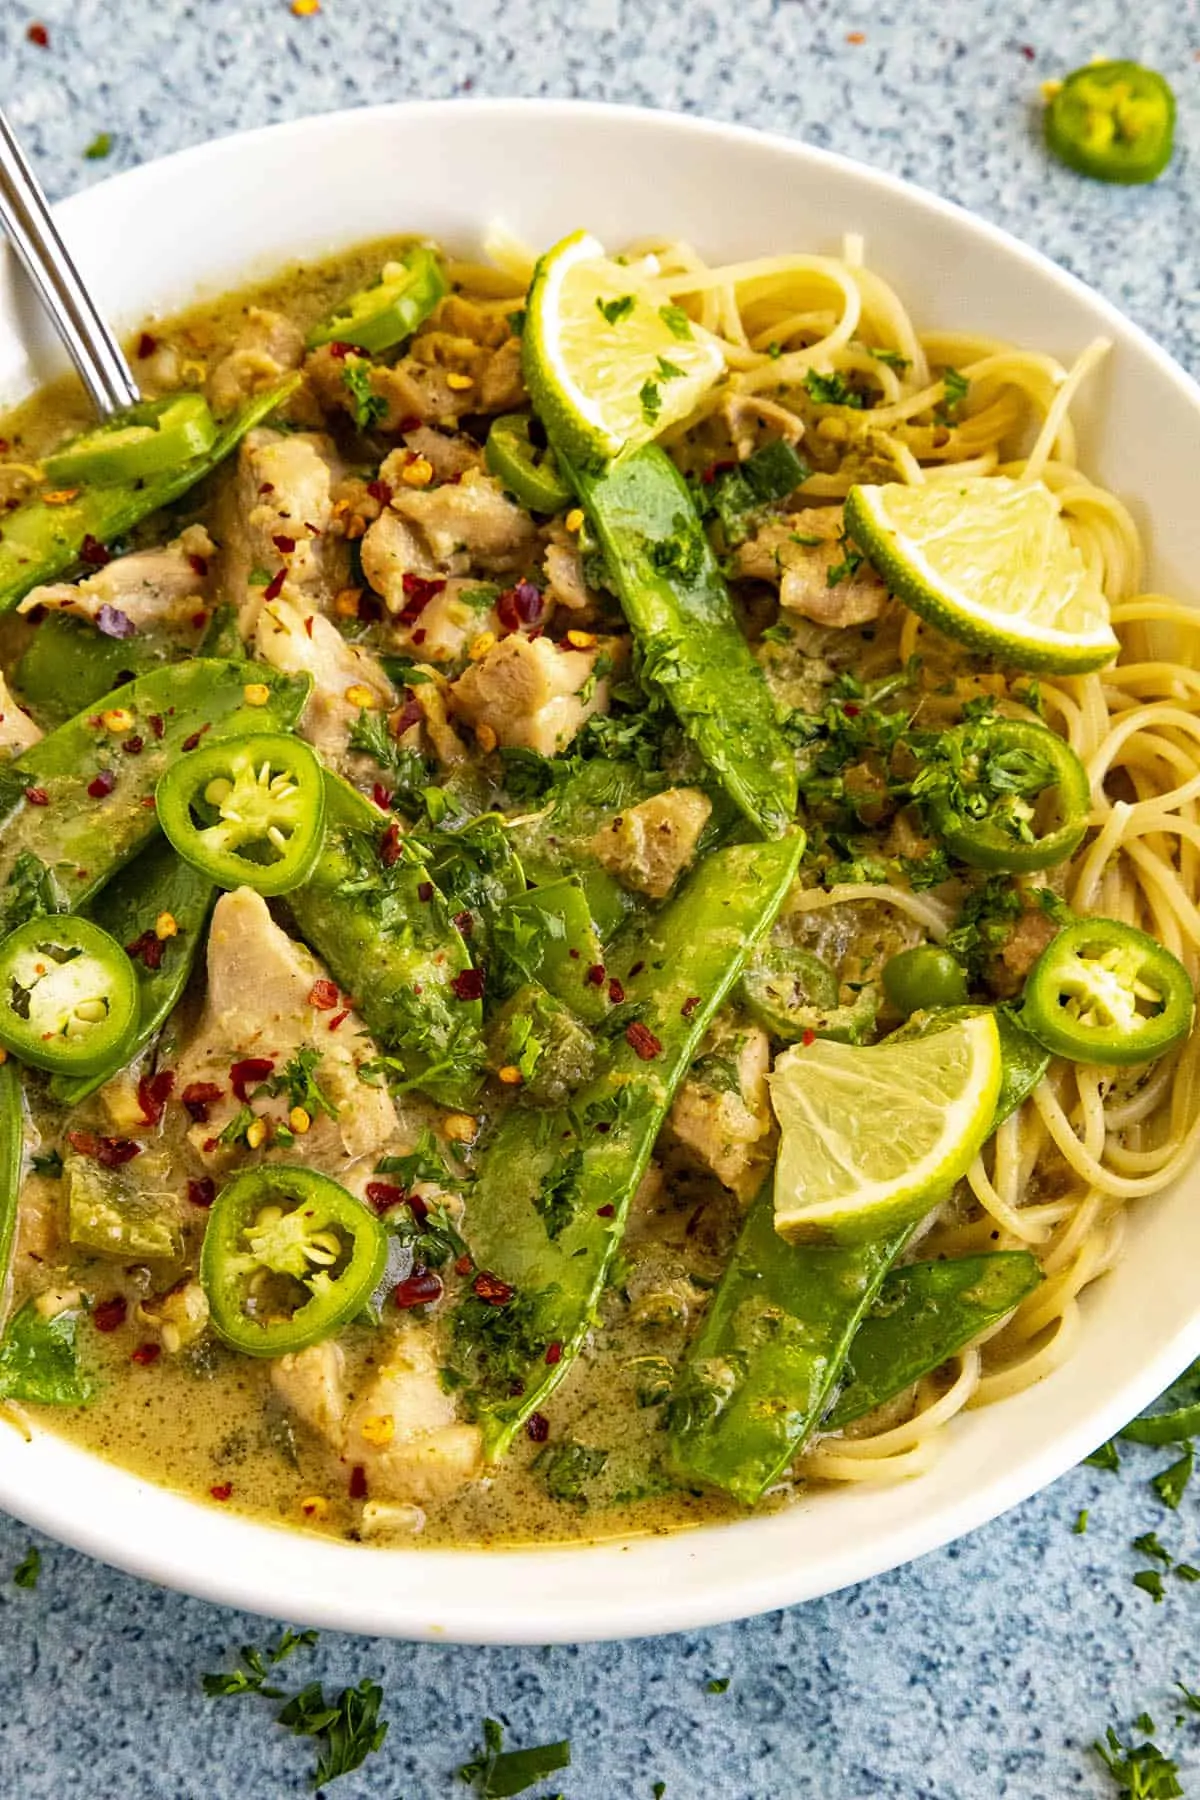 Spicy green curry in a bowl.